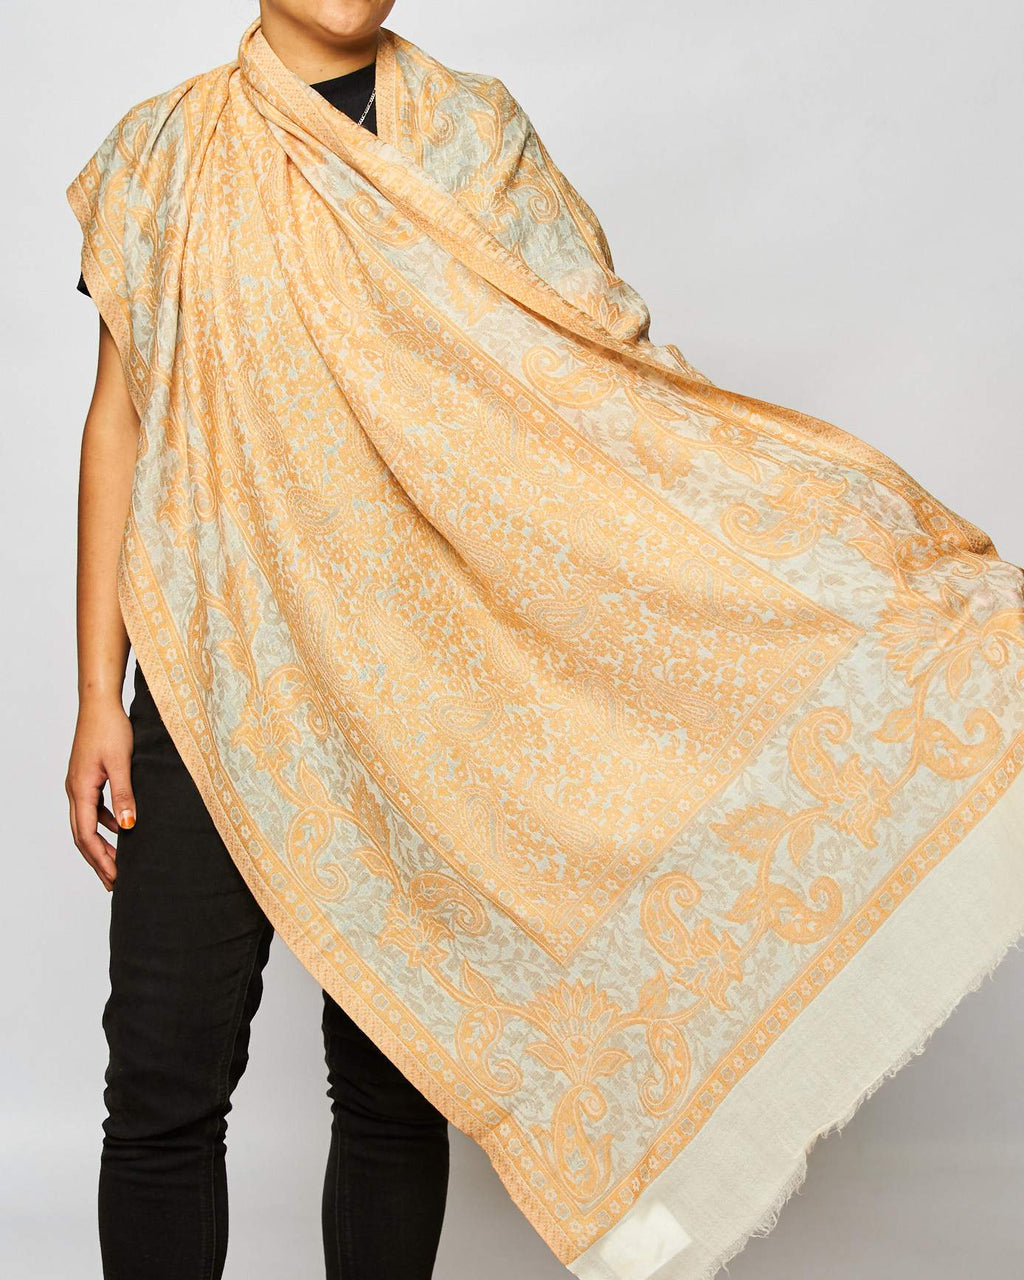 Cashmere Scarf Patterned - Apricot/Cream